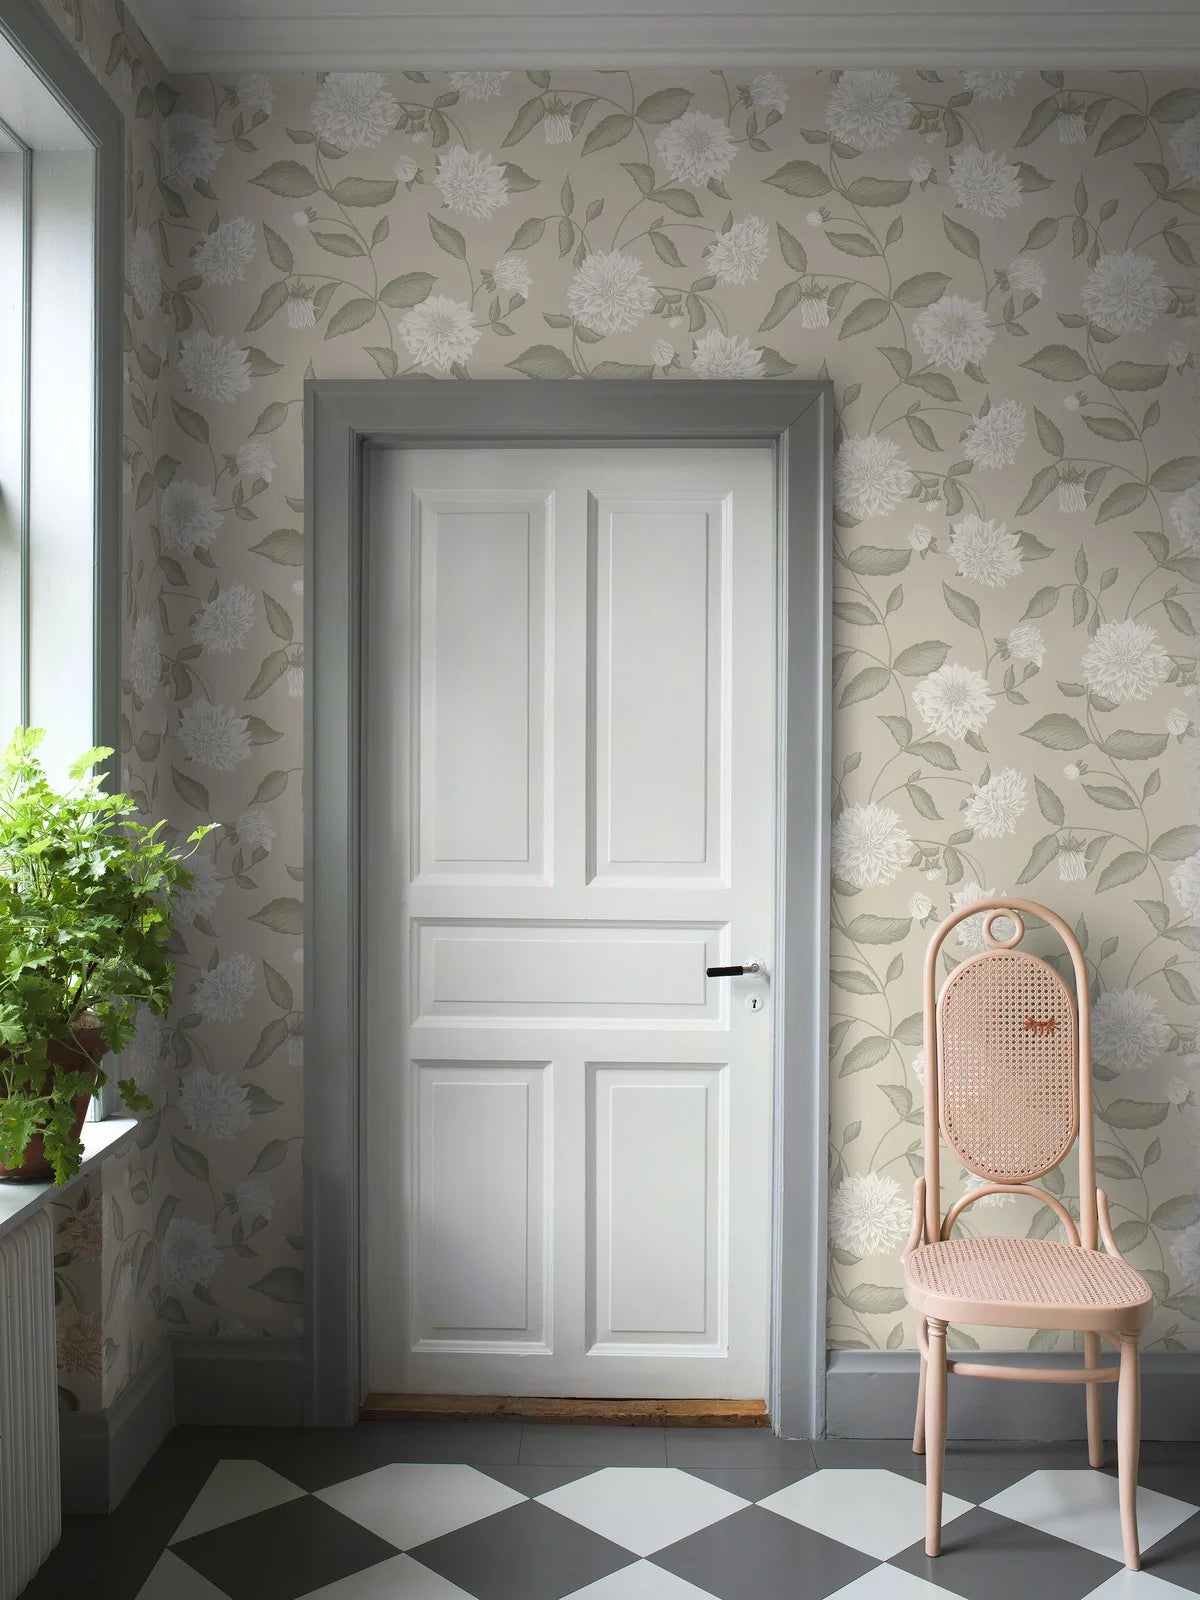 Embrace the timeless beauty of our Dahliadröm wallpaper in a lovely palette of ivory and green on a warm beige background. 